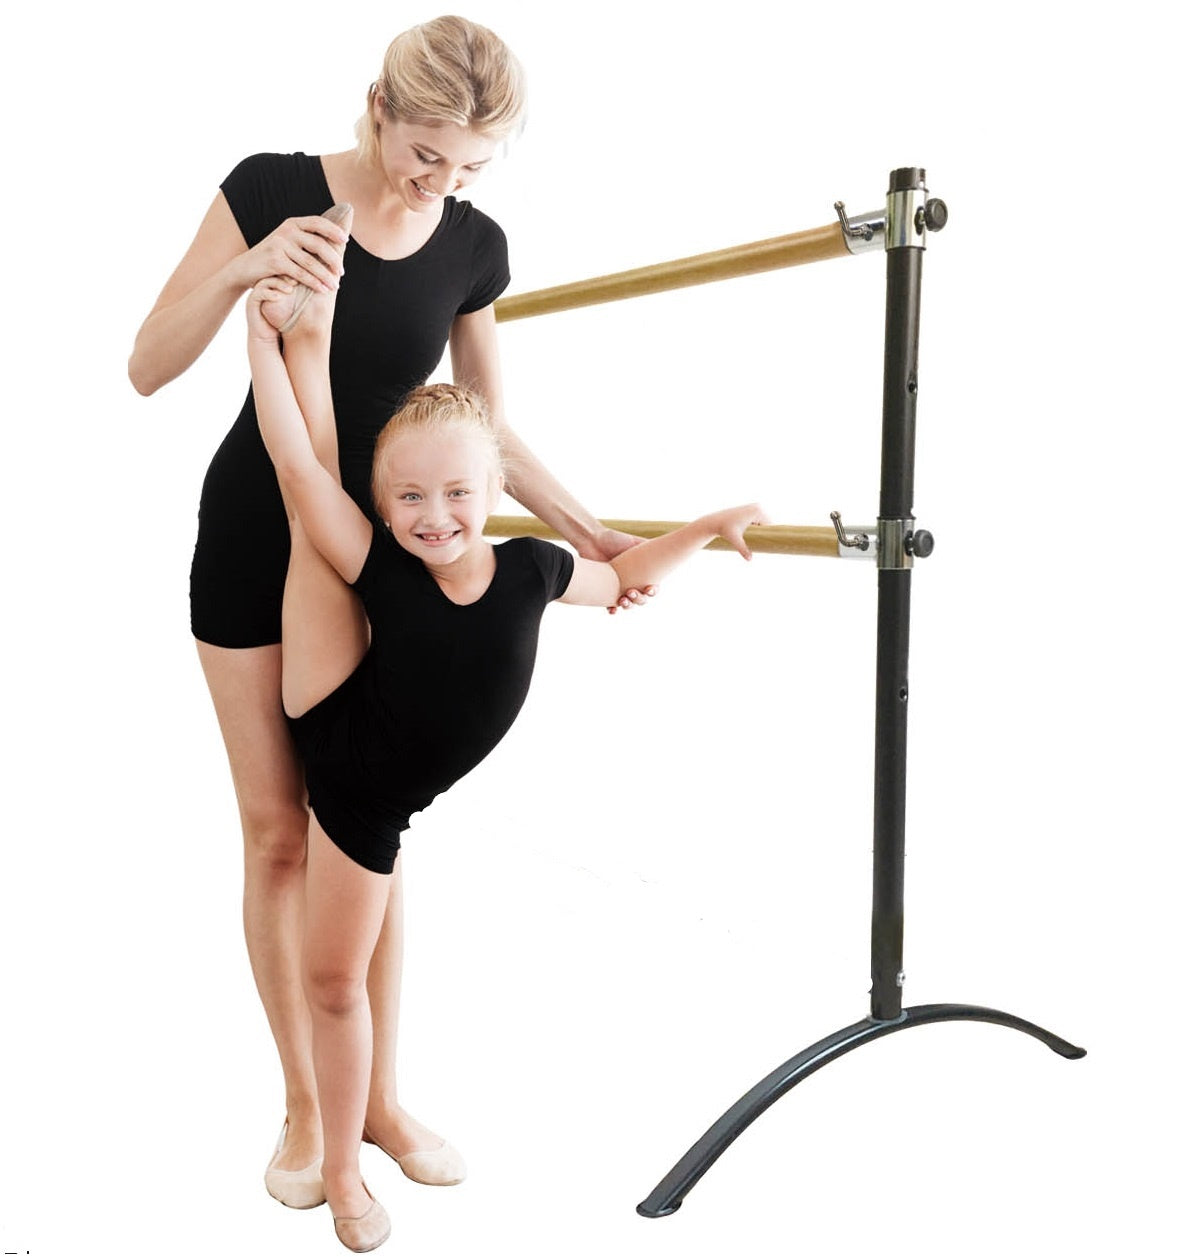  Artan Balance Ballet Barre Portable For Home Or Studio,  Height Adjustable Bar For Stretch, Pilates, Dance Or Active Workouts,  Double, Kids And Adults